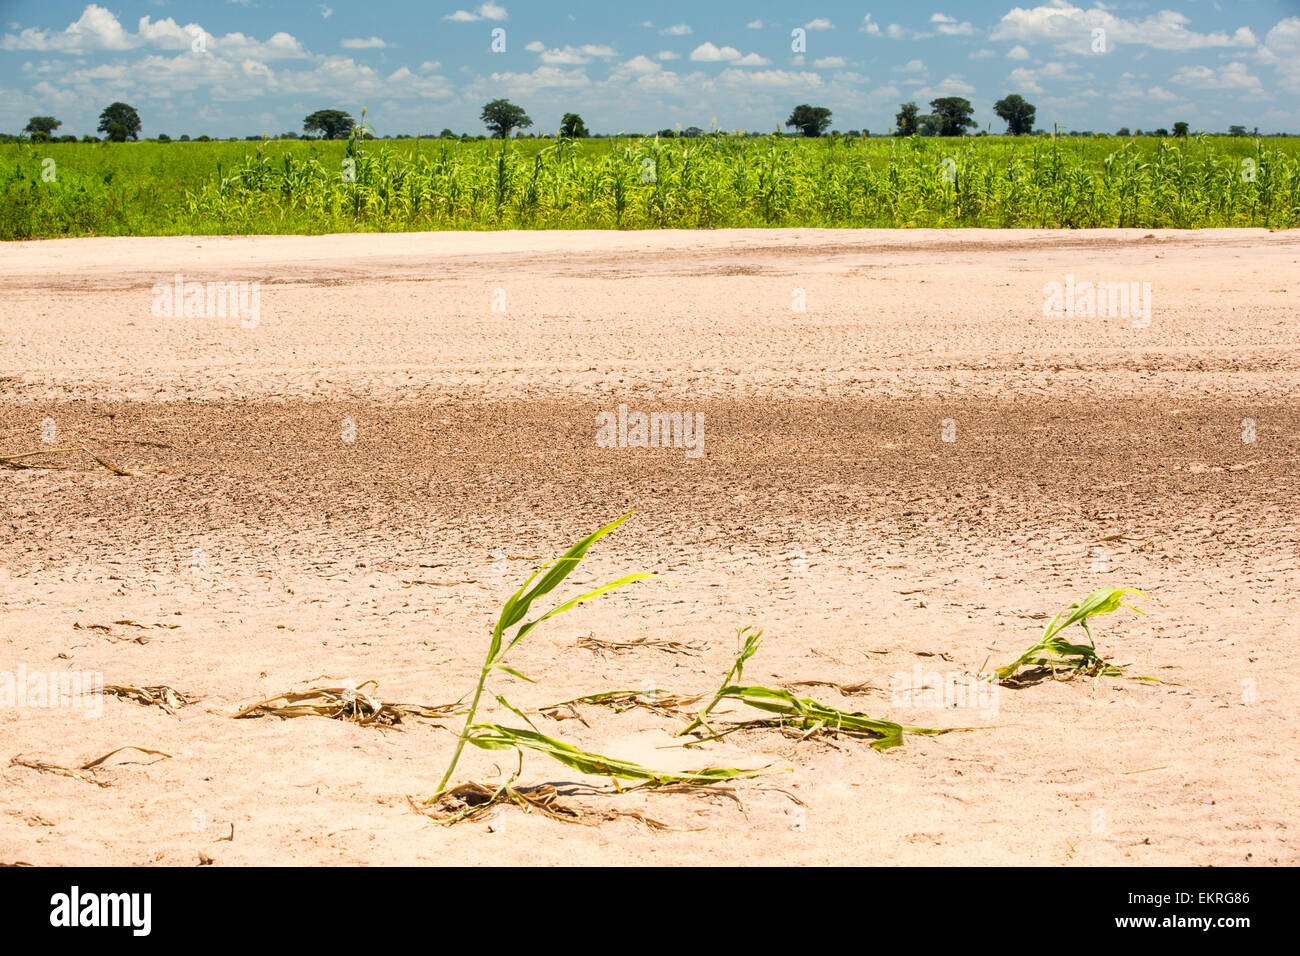 In mid January 2015, a three day period of excessive rain brought unprecedented floods to the small poor African country of Malawi. It displaced nearly quarter of a million people, devastated 64,000 hectares of land, and killed several hundred people. This shot shows Maize crops destroyed near Bangula. Stock Photo